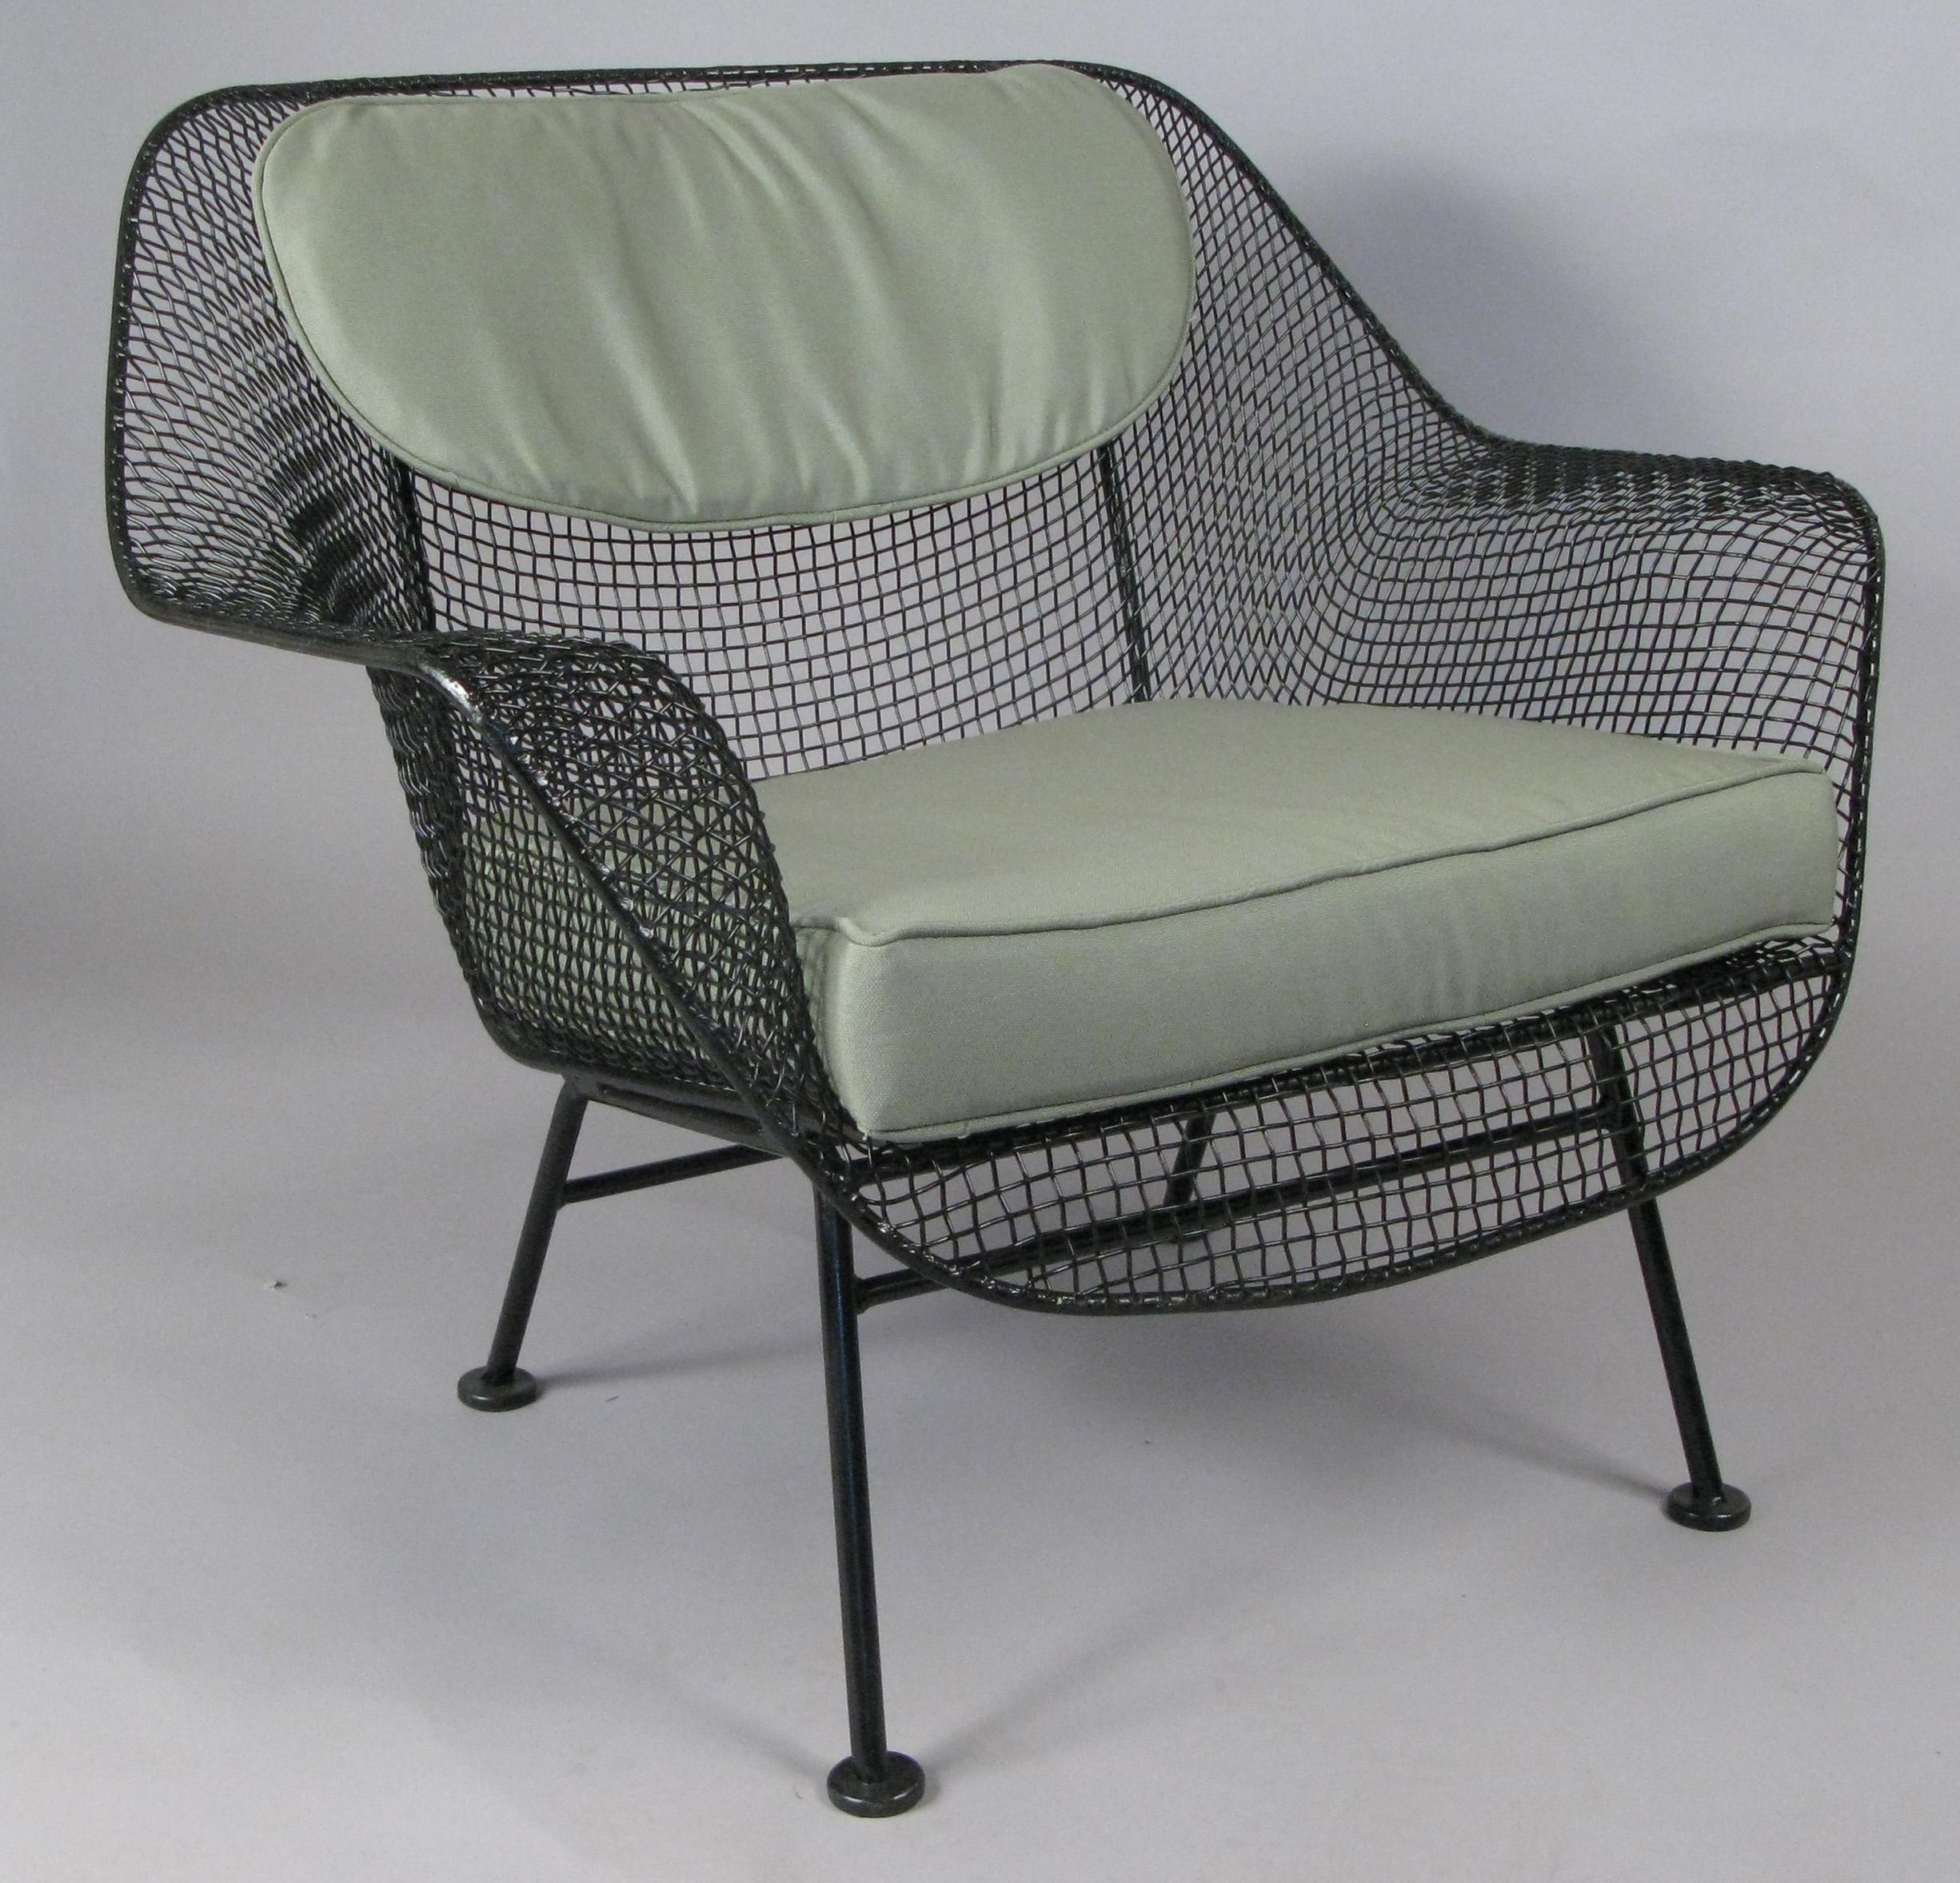 A pair of 1950s 'Sculptura' lounge chairs designed by Russell Woodard. 

Woodard's Sculptura collection was made with wrought iron frames and woven steel mesh seats. These are the largest and most comfortable lounge chairs made by Woodard in the